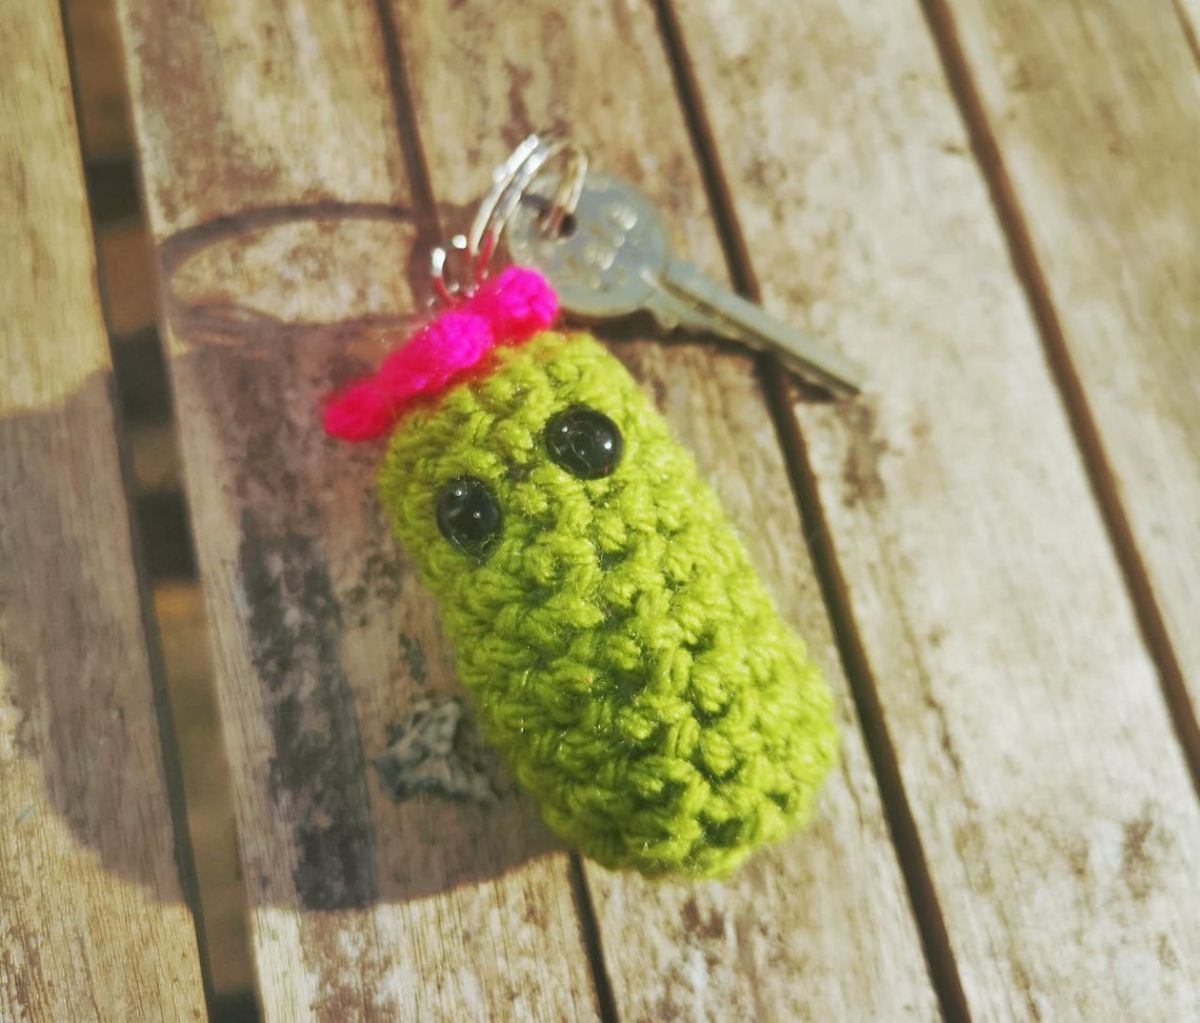 Small green crochet cactus with two eyes and a pink bow on its head attached to a keychain with a single silver key on a wooden table. 